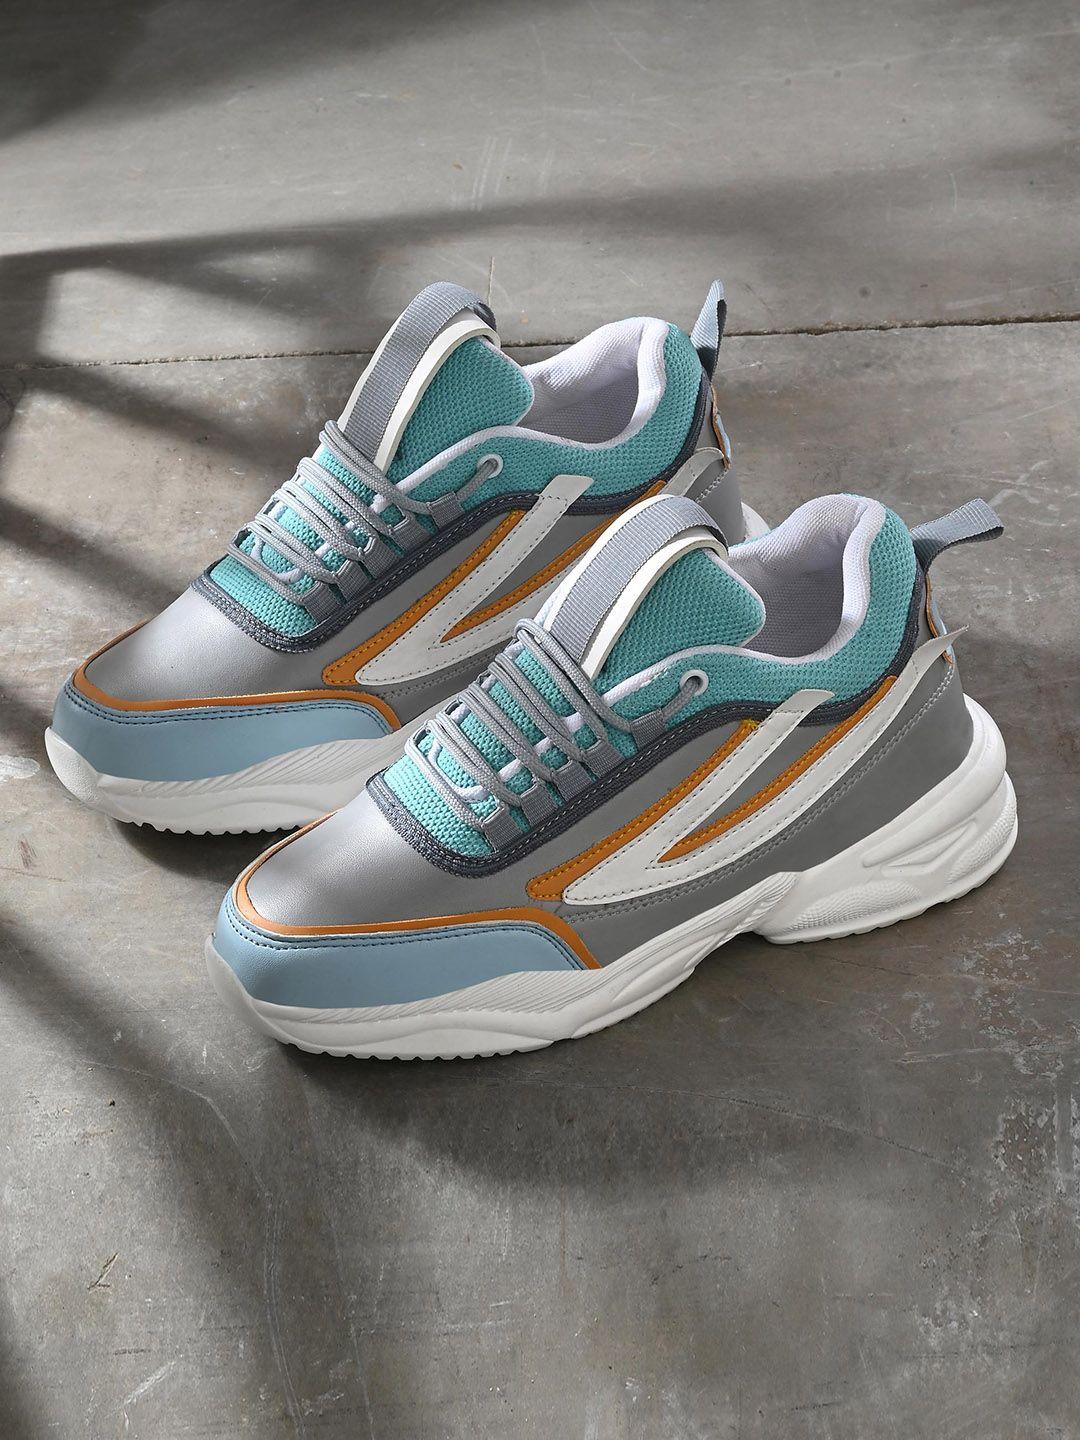 the roadster lifestyle co. women grey and blue colourblocked sneakers